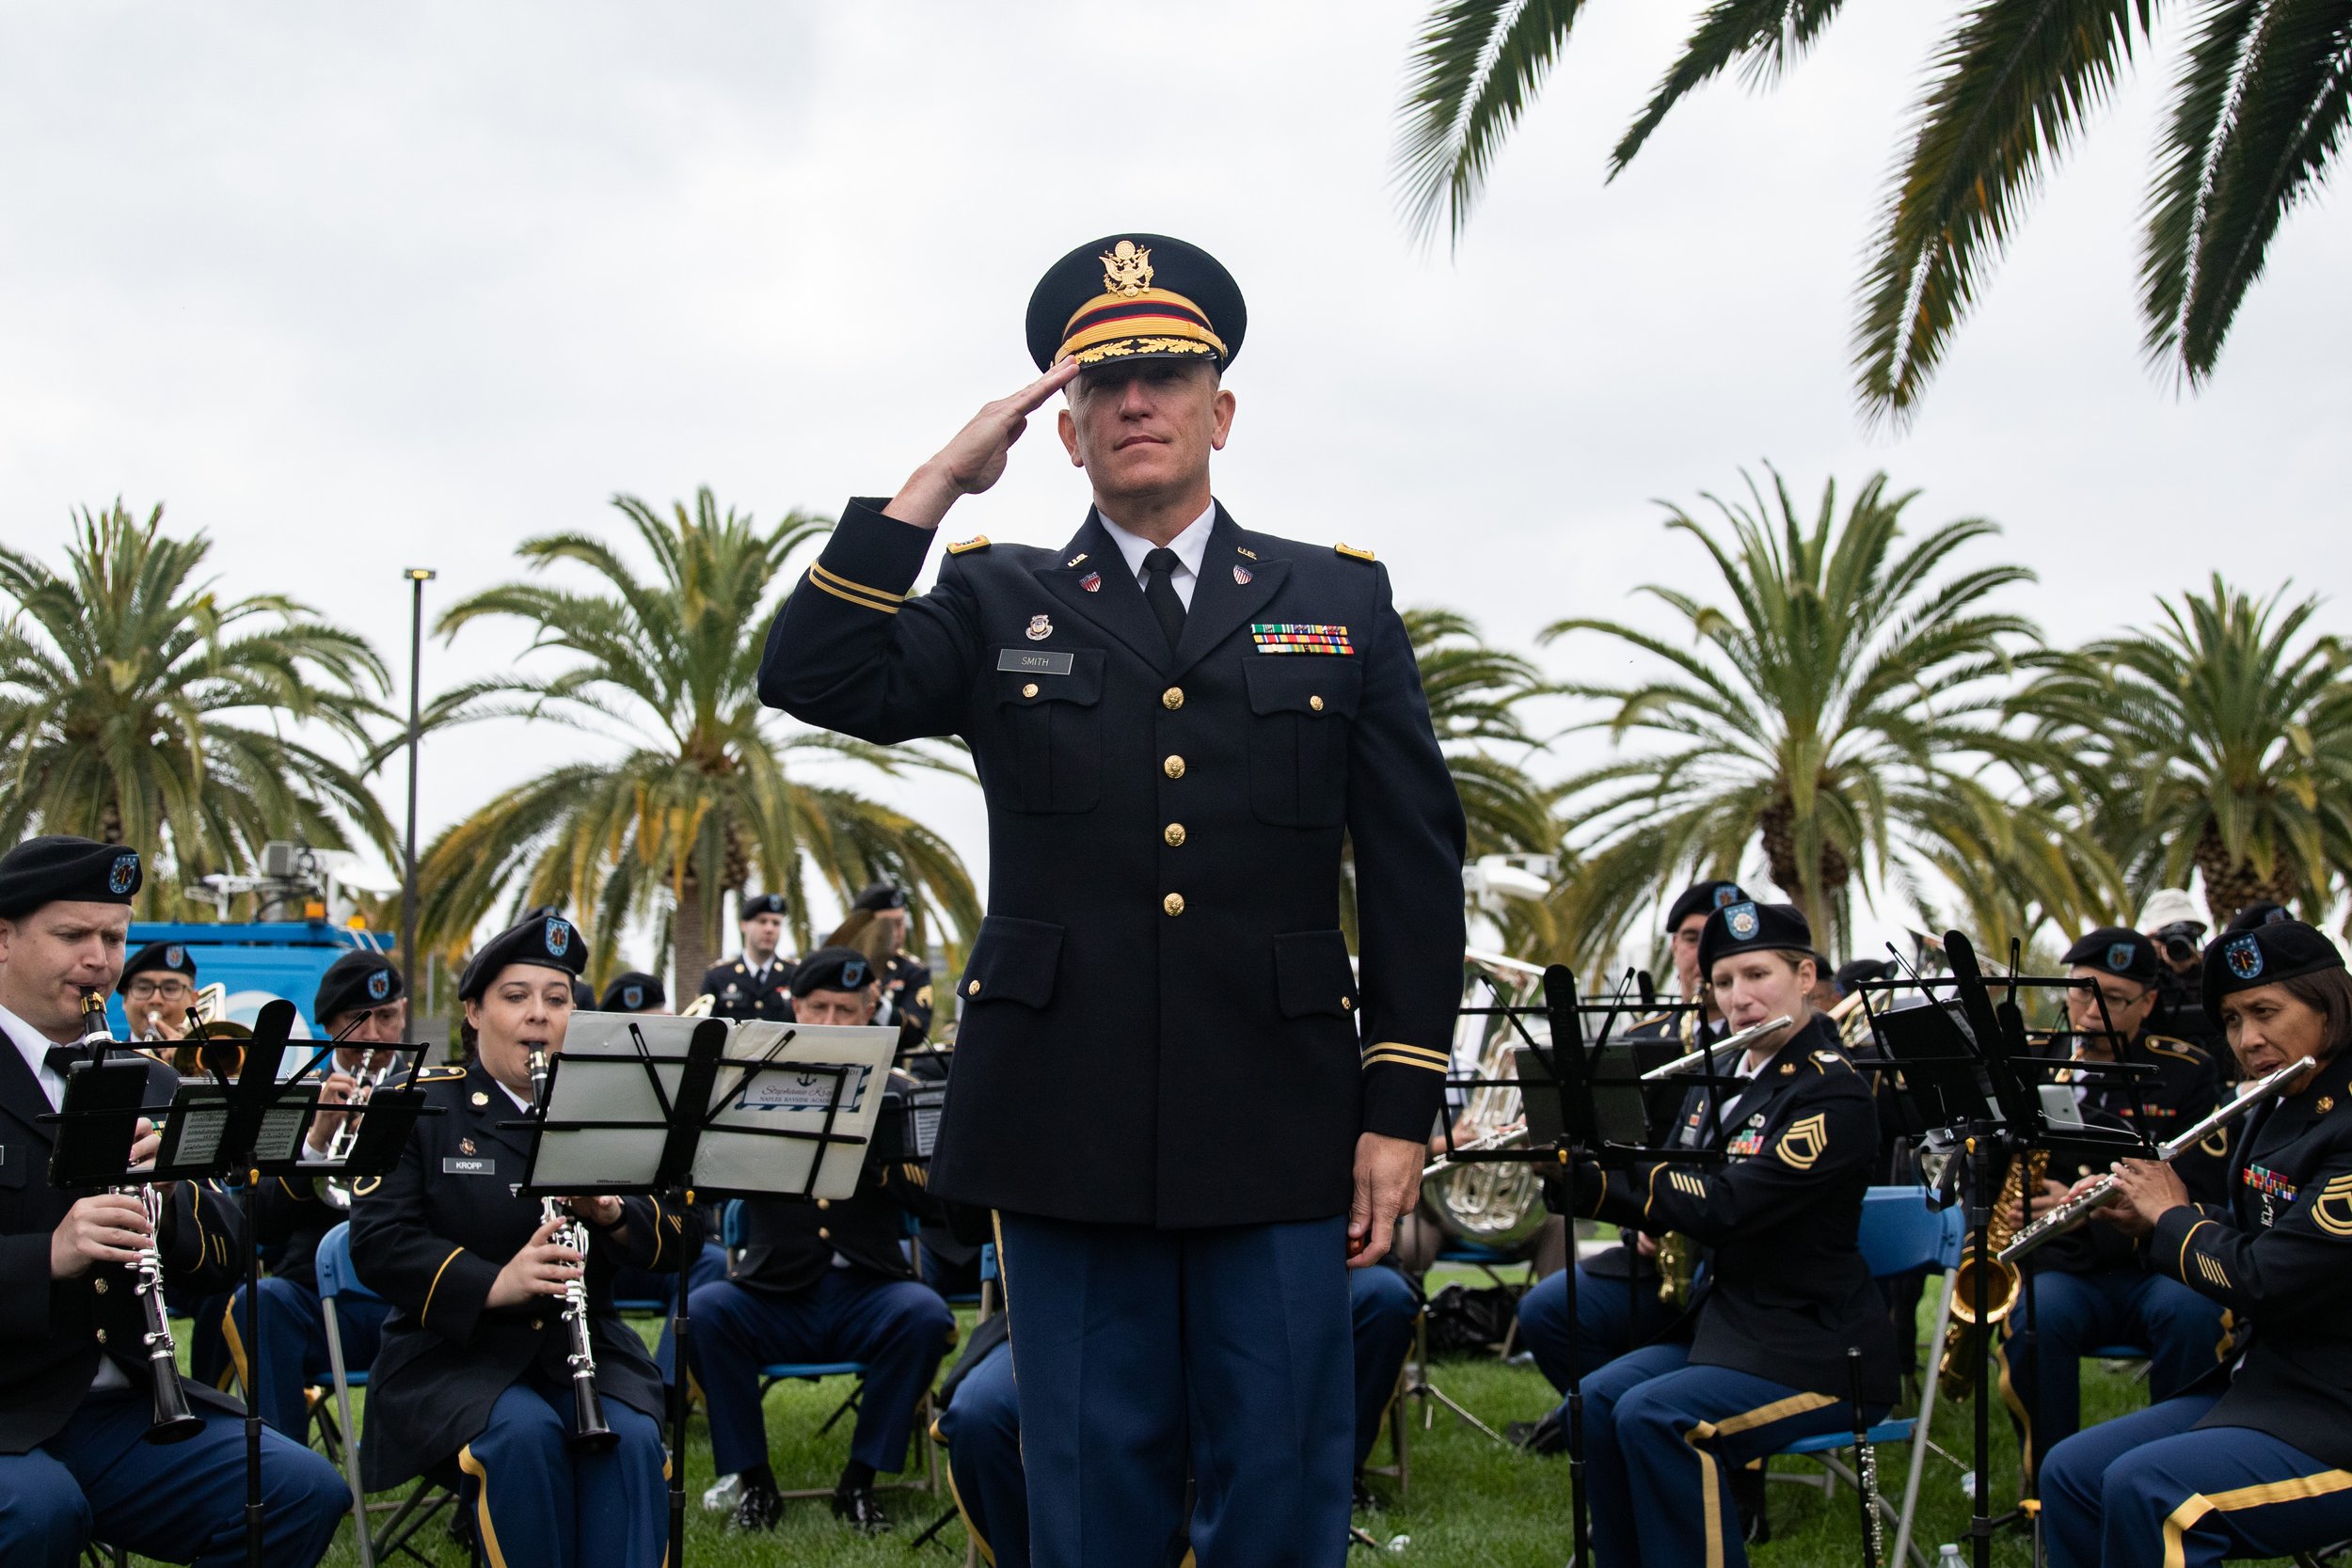  Chief Warrant Officer Jeff Smith saluting to the different military branches during the “Branches of Service Medley” played by the 300th  Army Band during the Memorial Day Celebration at Los Angeles National Cemetery in Los Angeles, Calif., on Monda